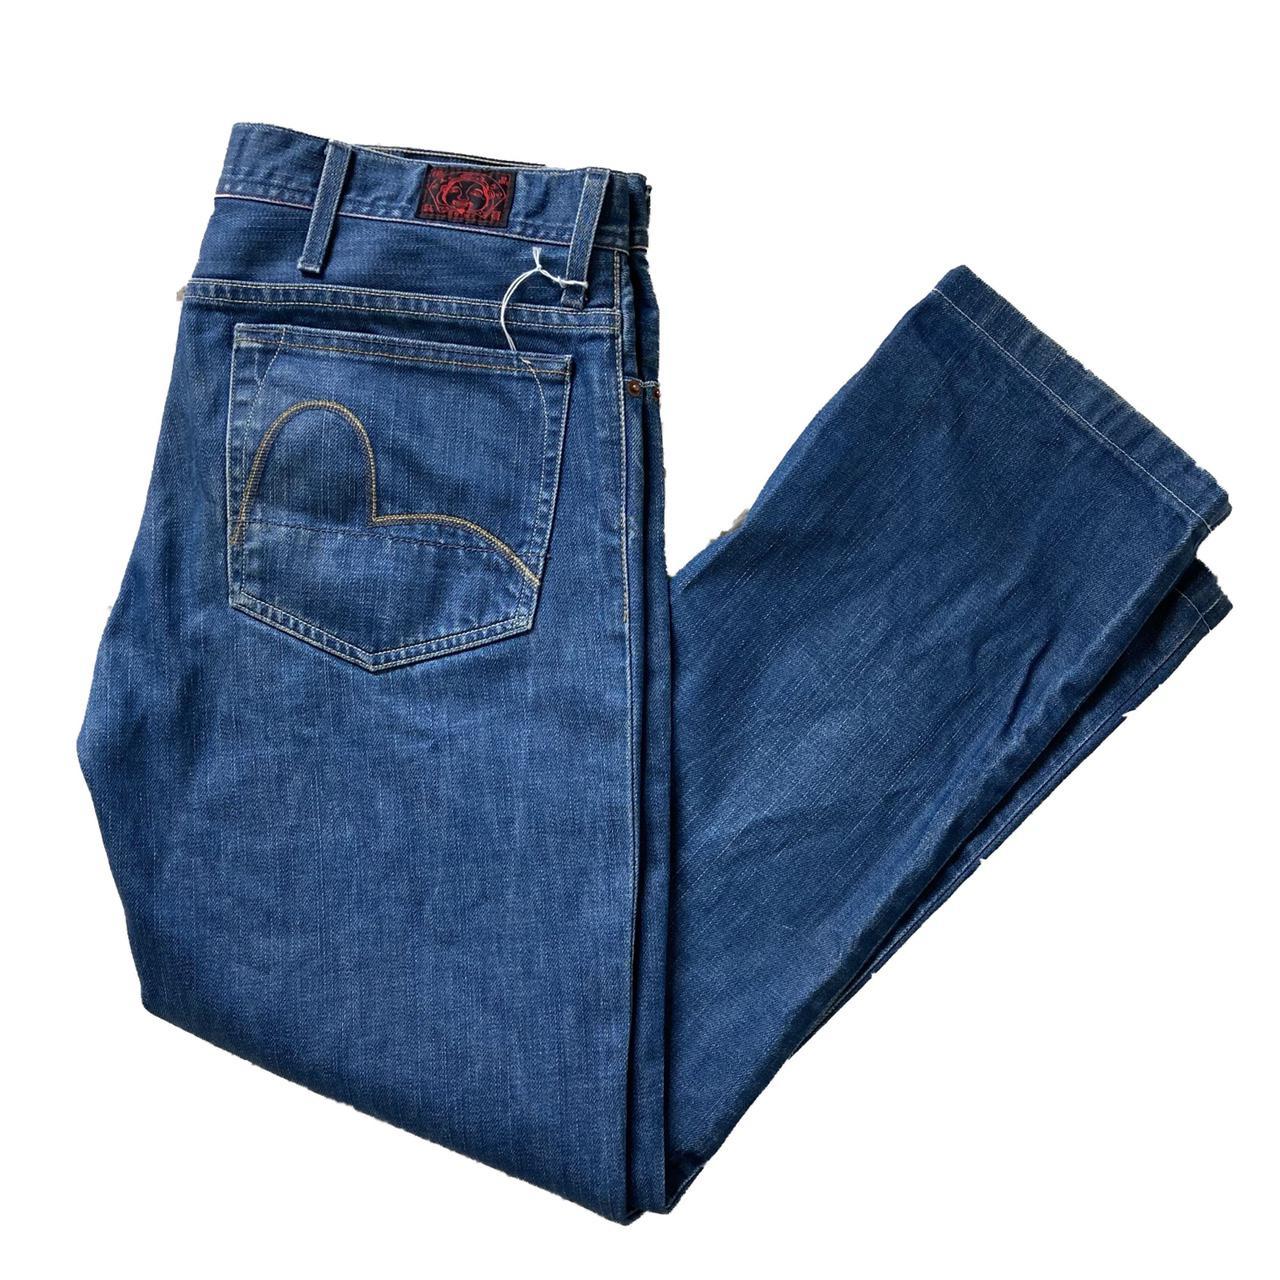 Evisu blue baggy jeans w embroidered logo on the... - Depop